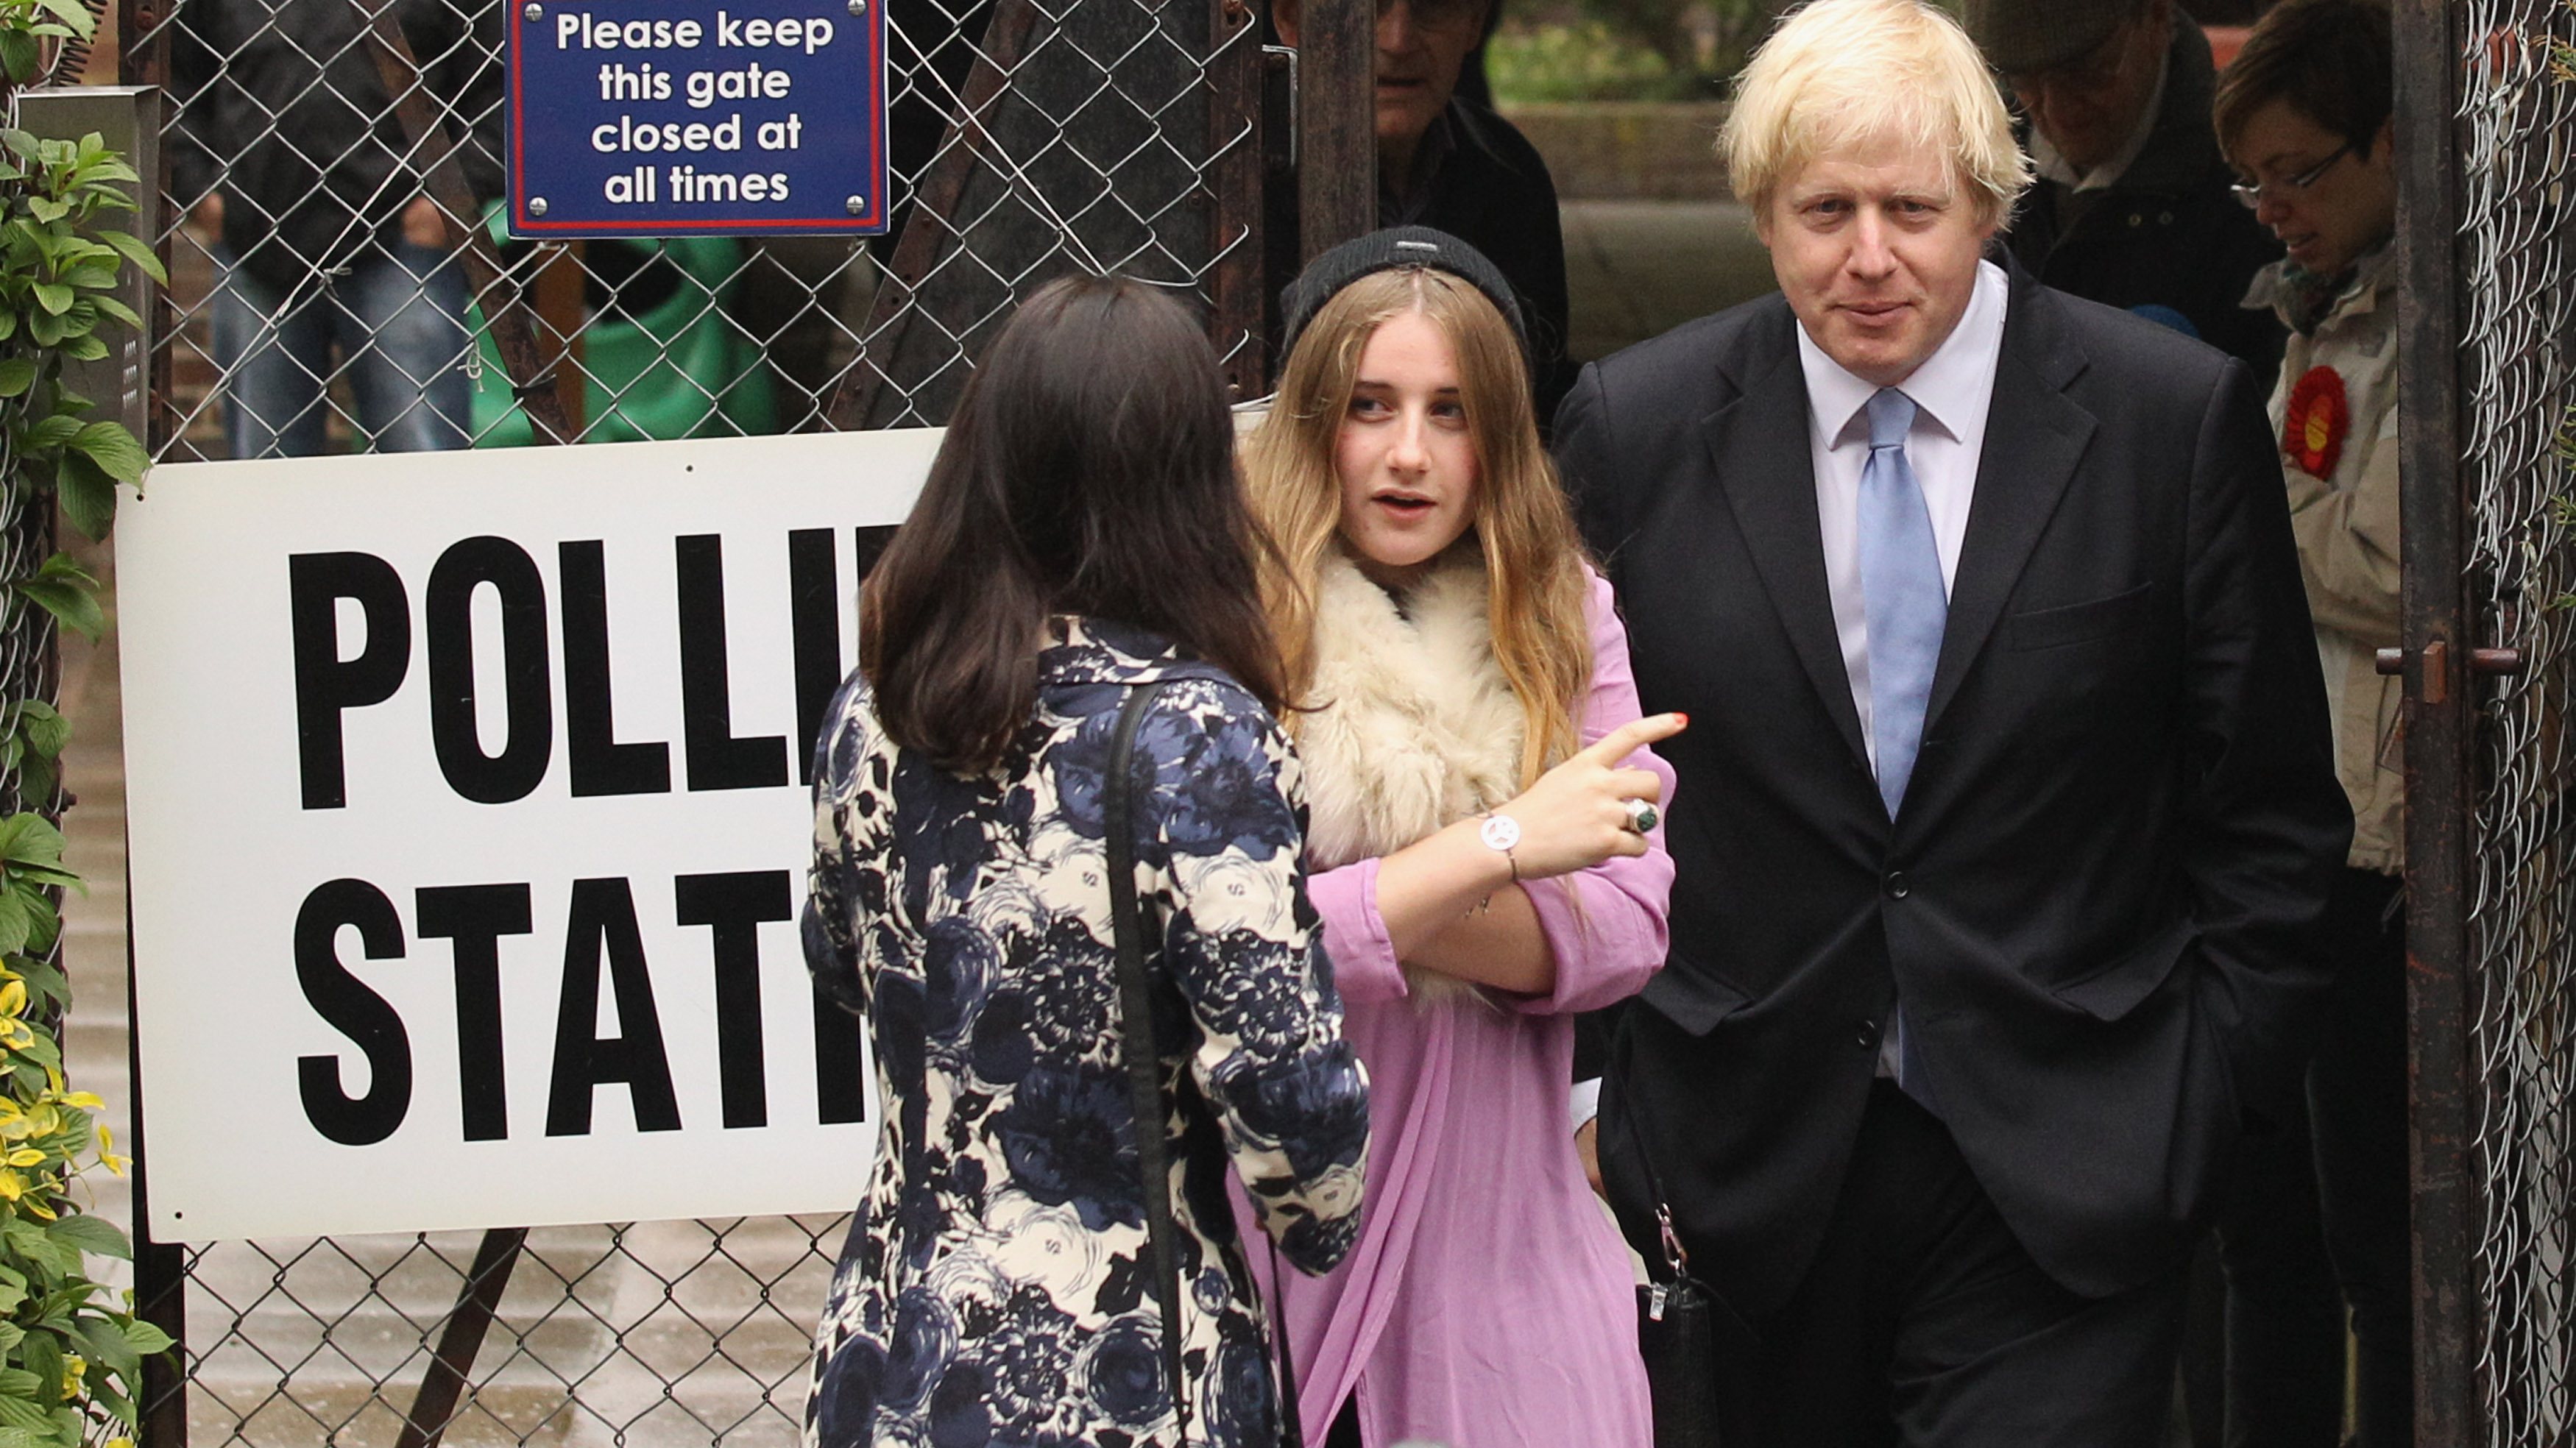 Current Mayor Of London Boris Johnson Casts His Vote In The London Mayoral Elections